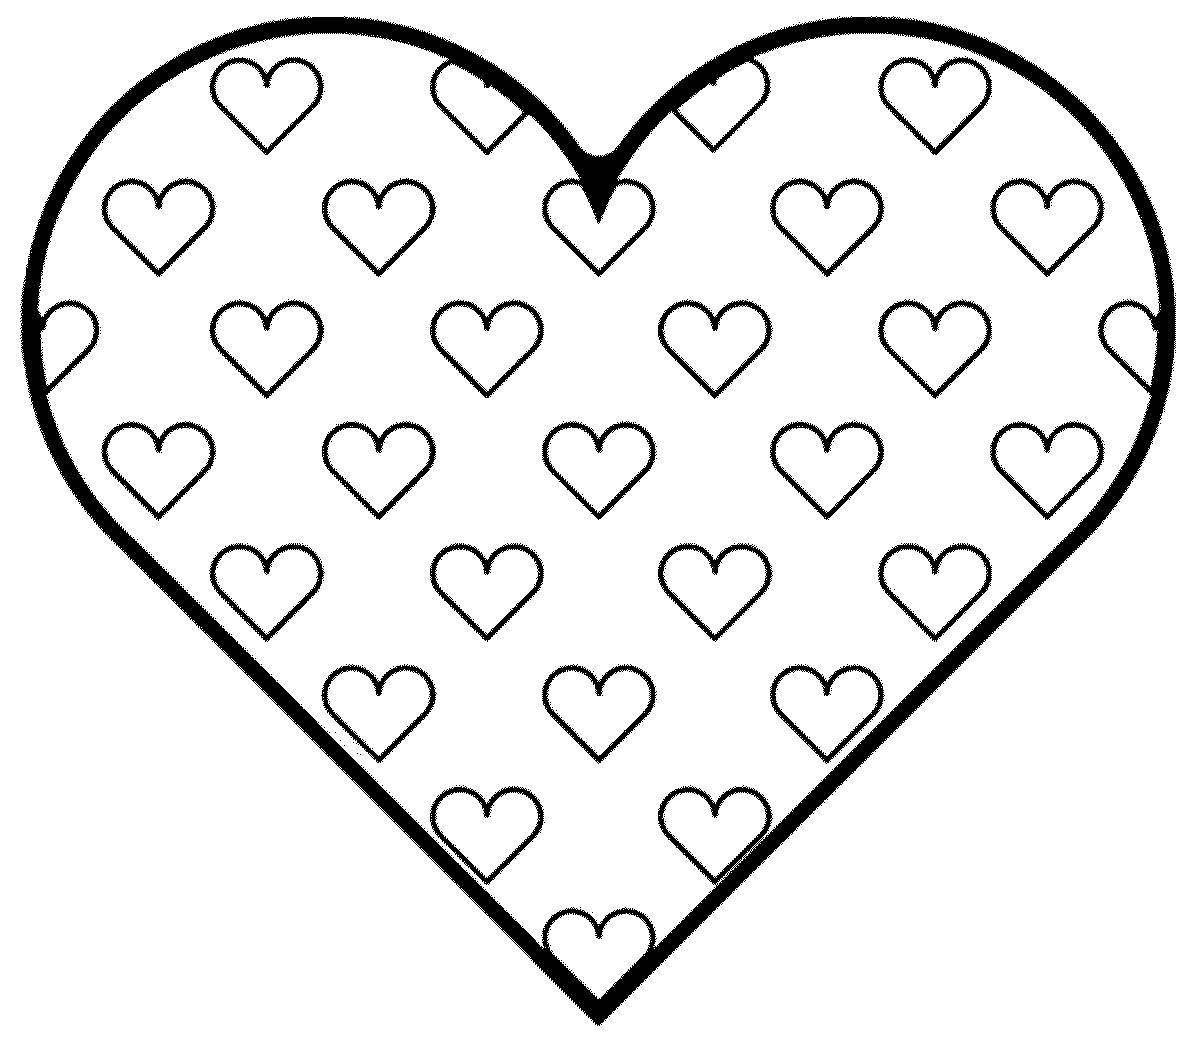 Little hearts filled with joy coloring page